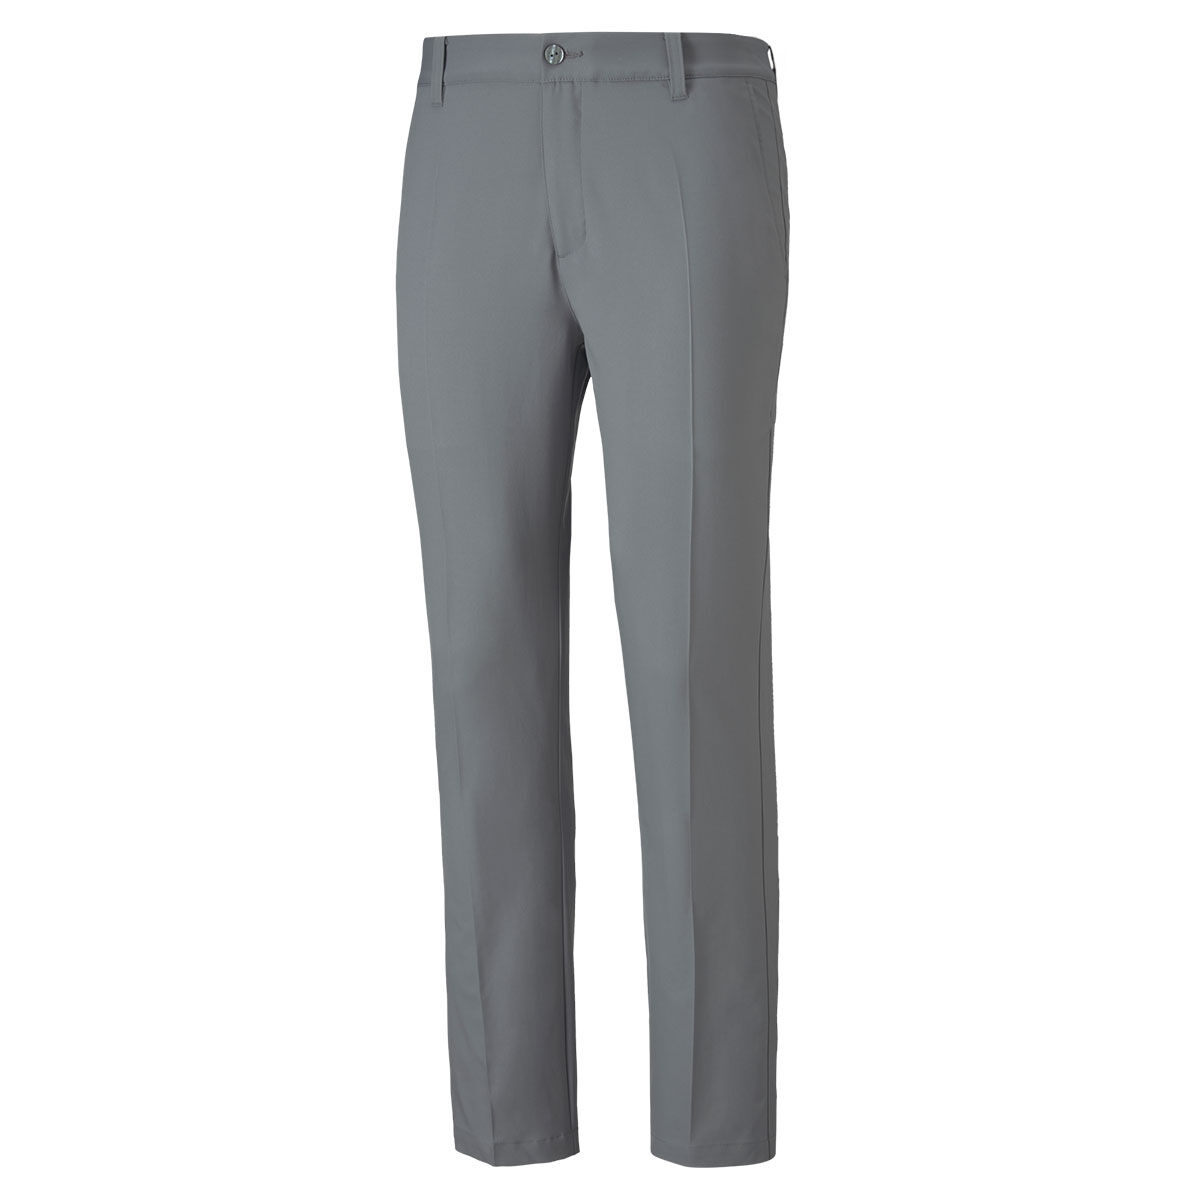 PUMA Golf Mens Grey Tailored Tech Golf Trousers, Male, Quiet Shade, 34, Long, Size: 34 | American Golf